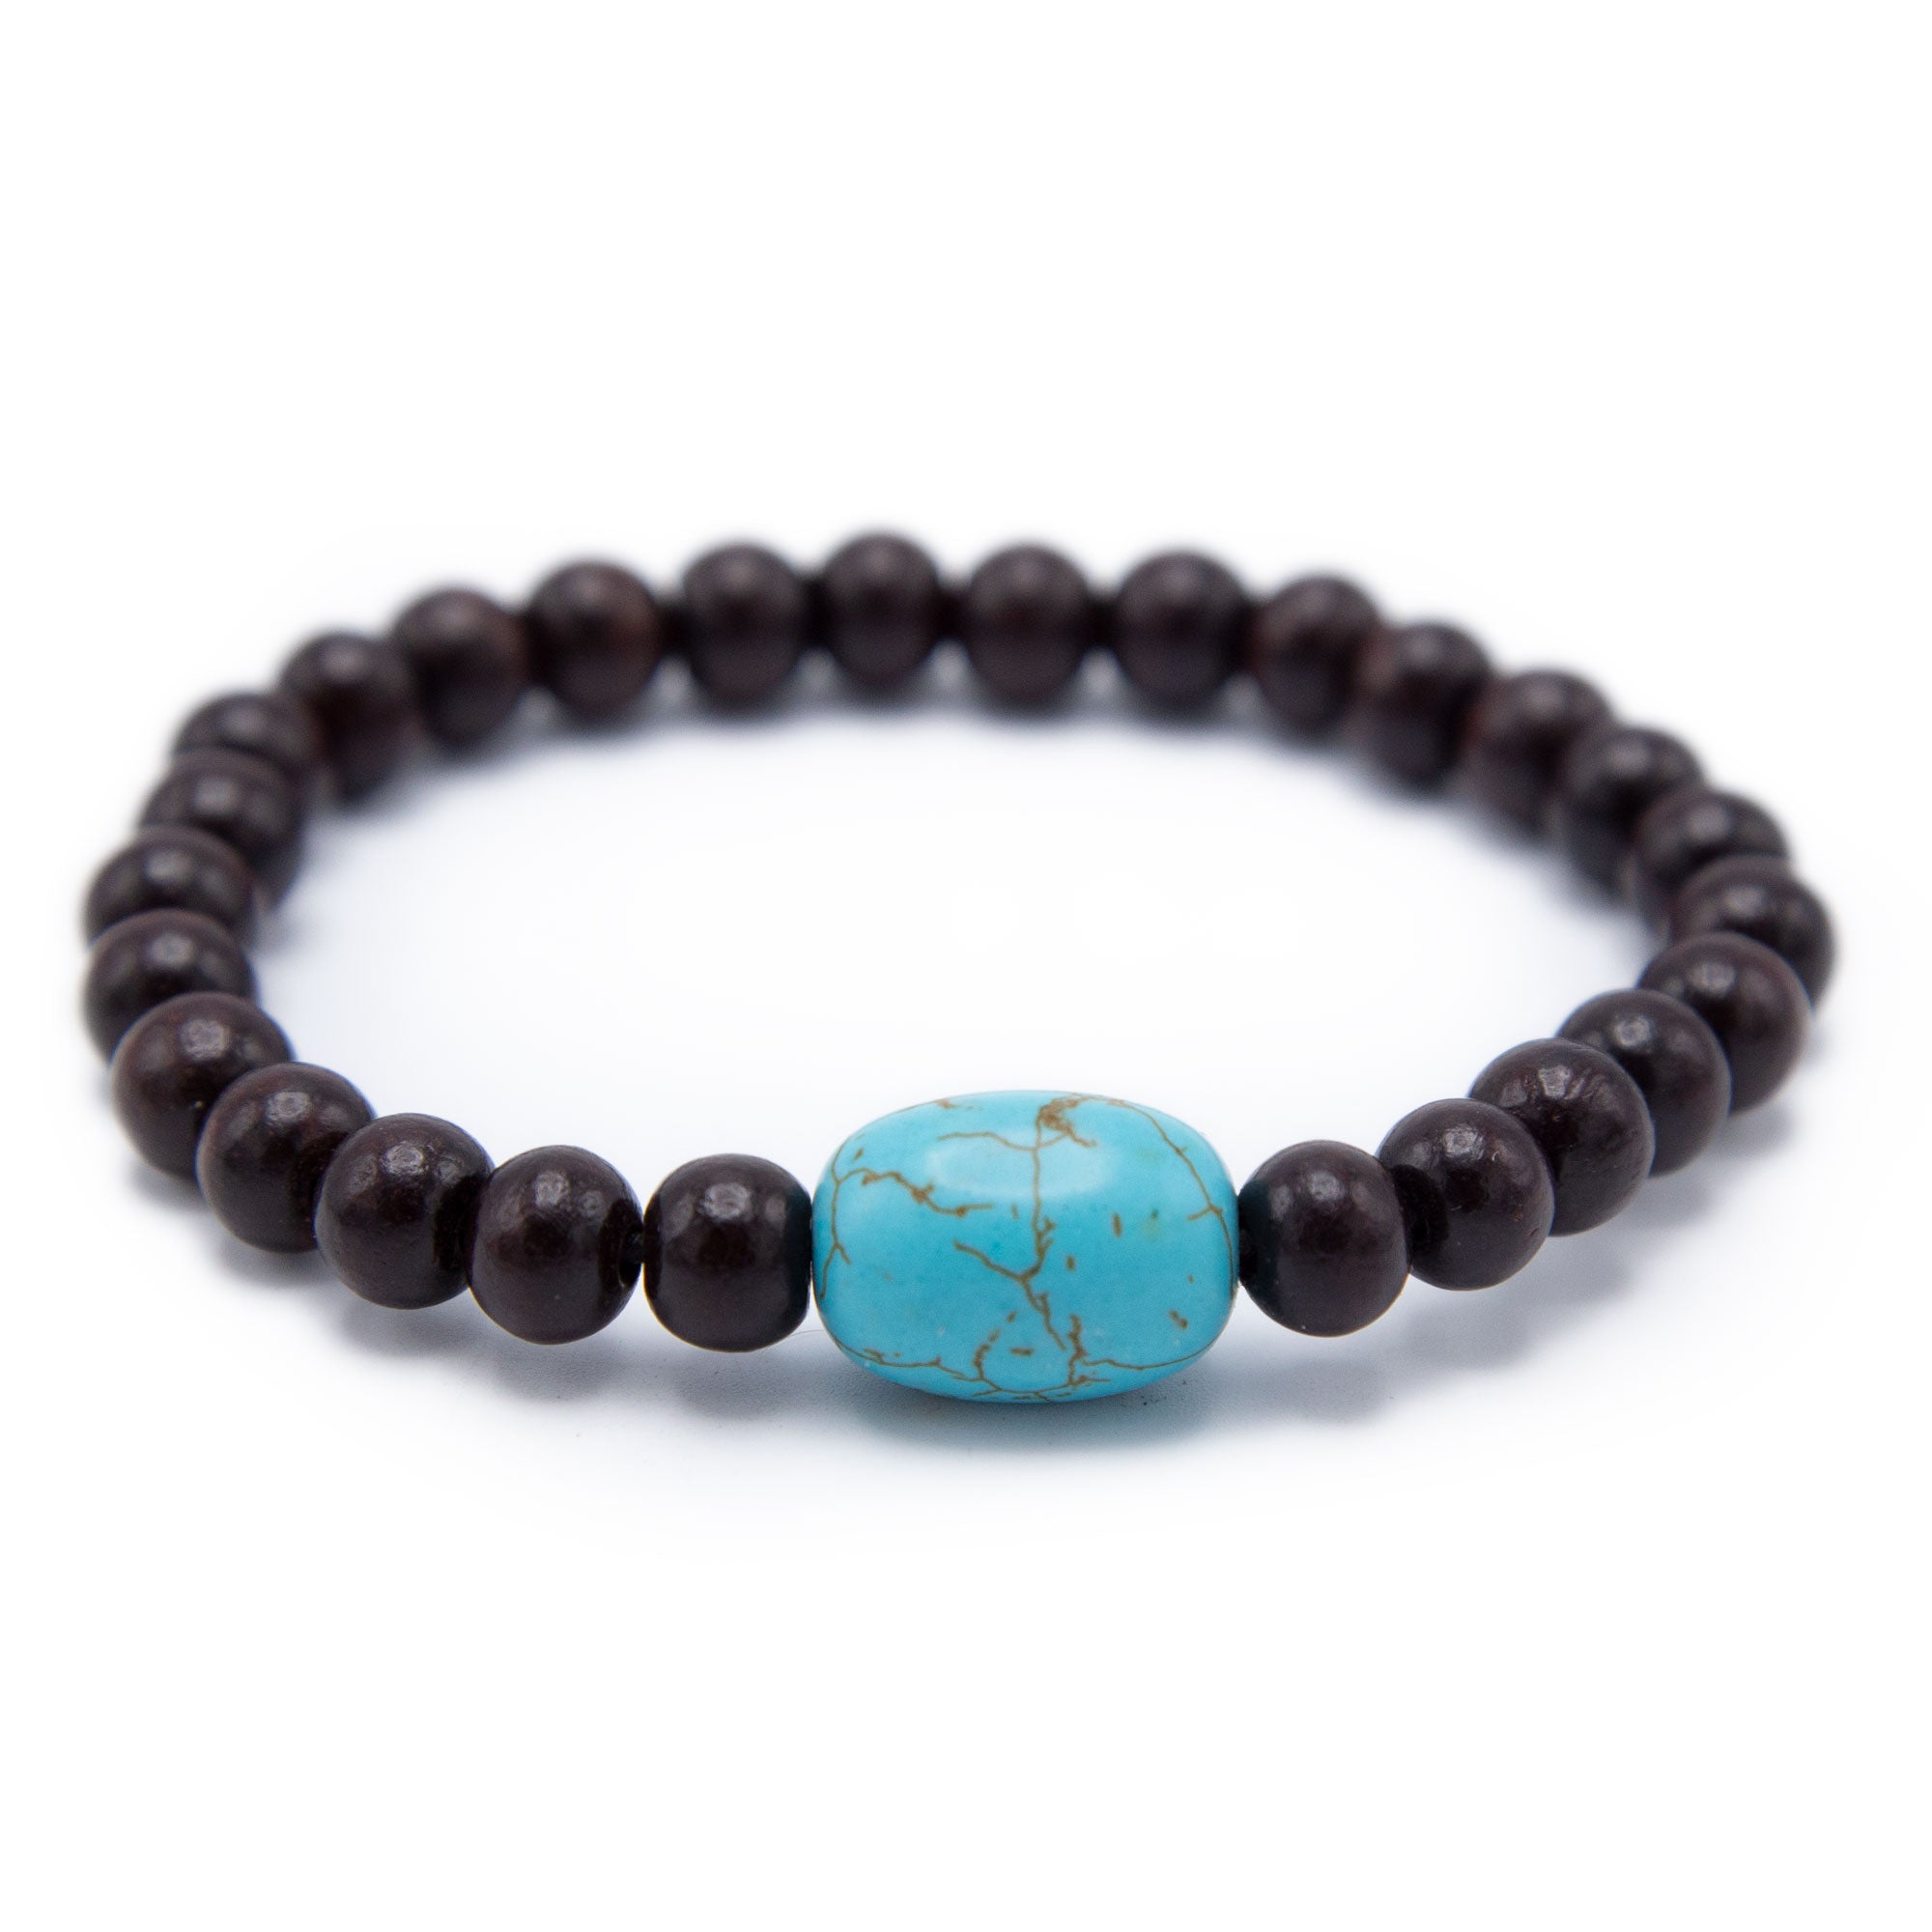 Rosewood and Turquoise Prostration Mala - 8mm